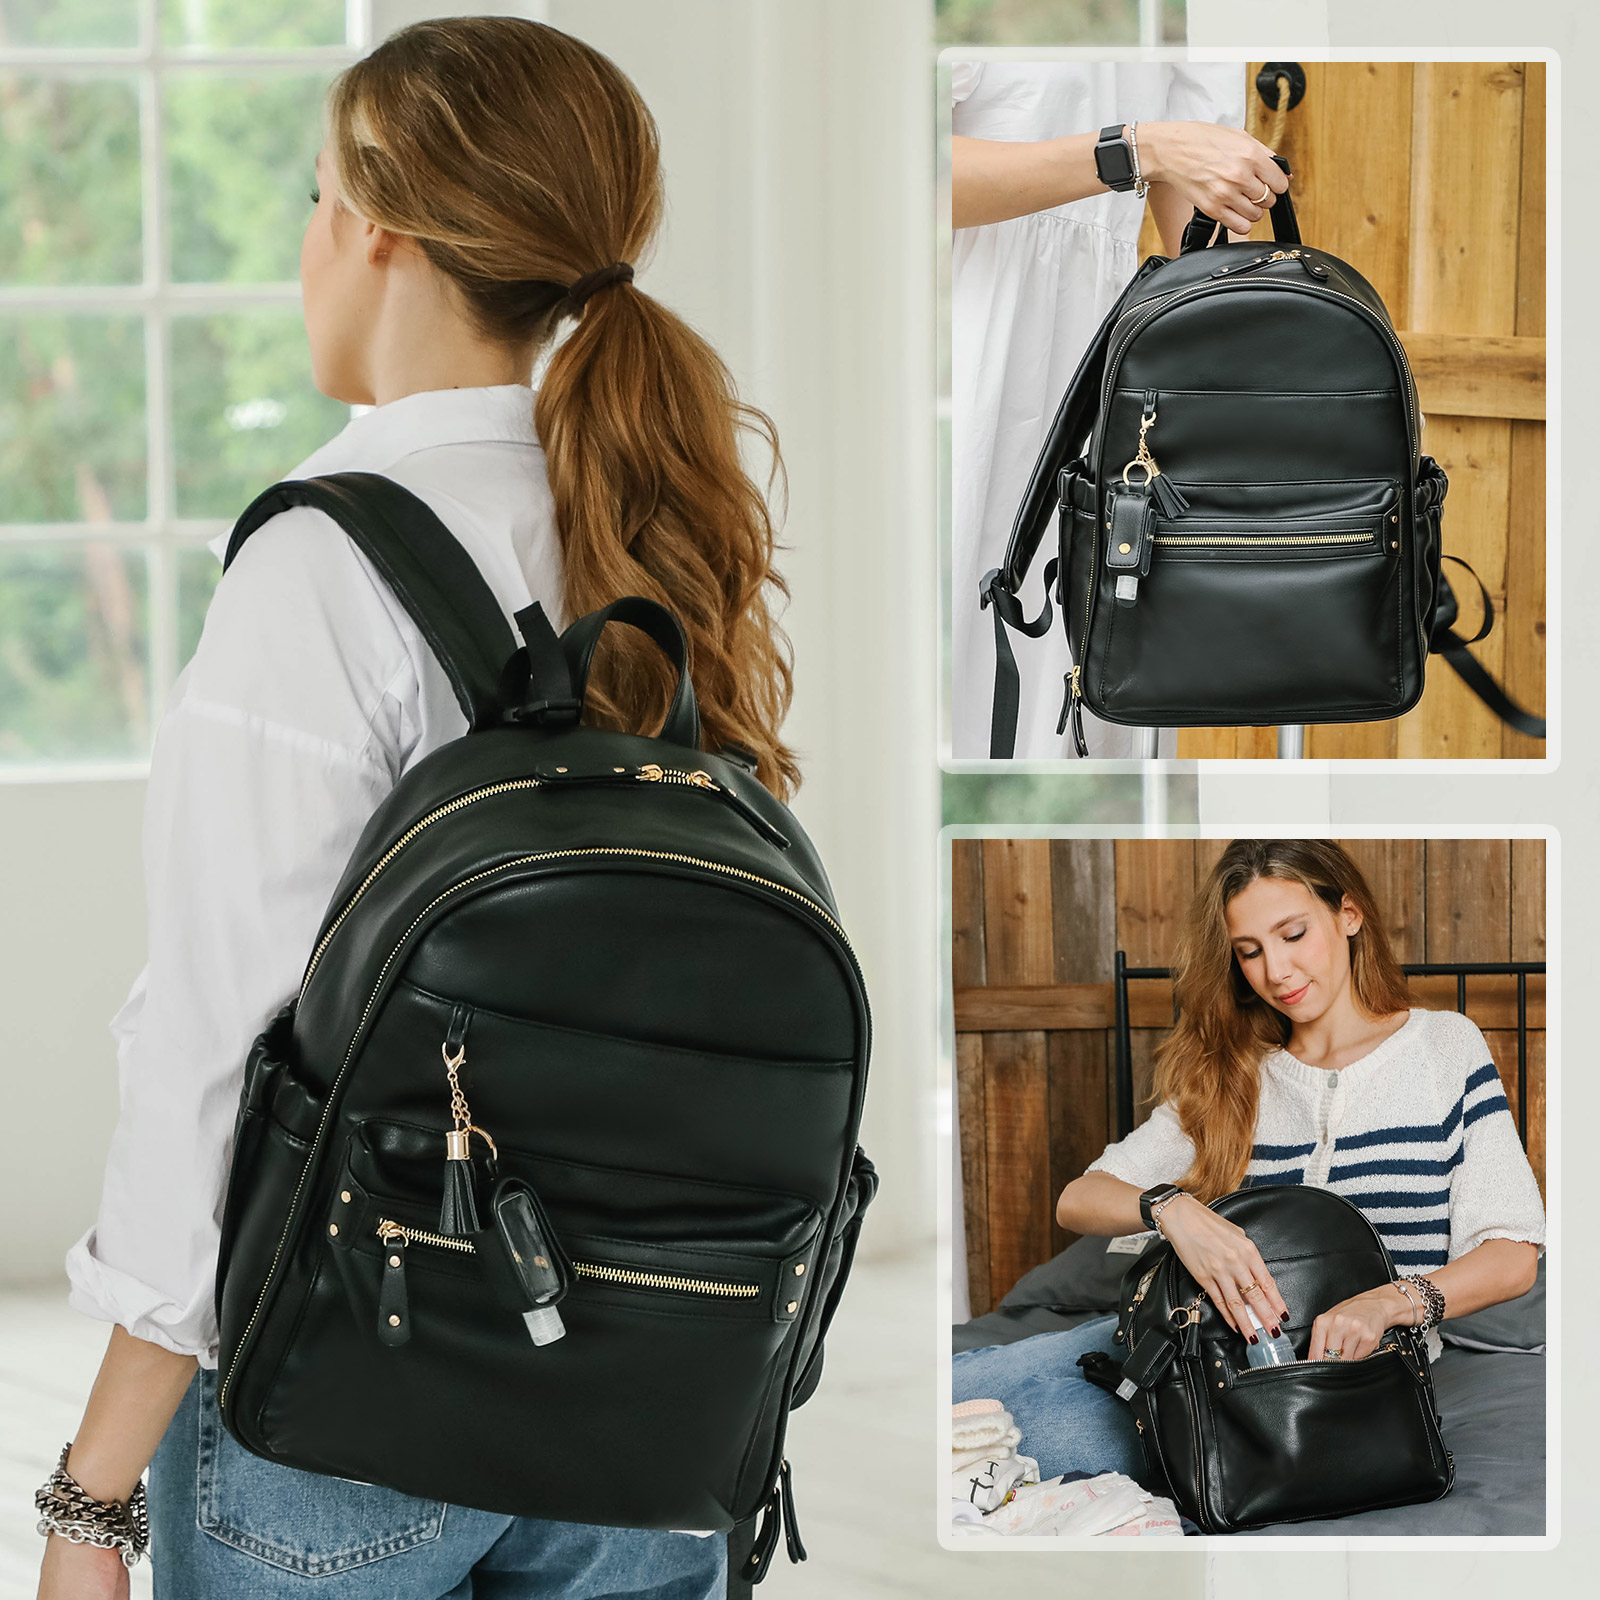 3-in-1 Convertible Backpack + Baby Changing Pad | Baggallini in Black